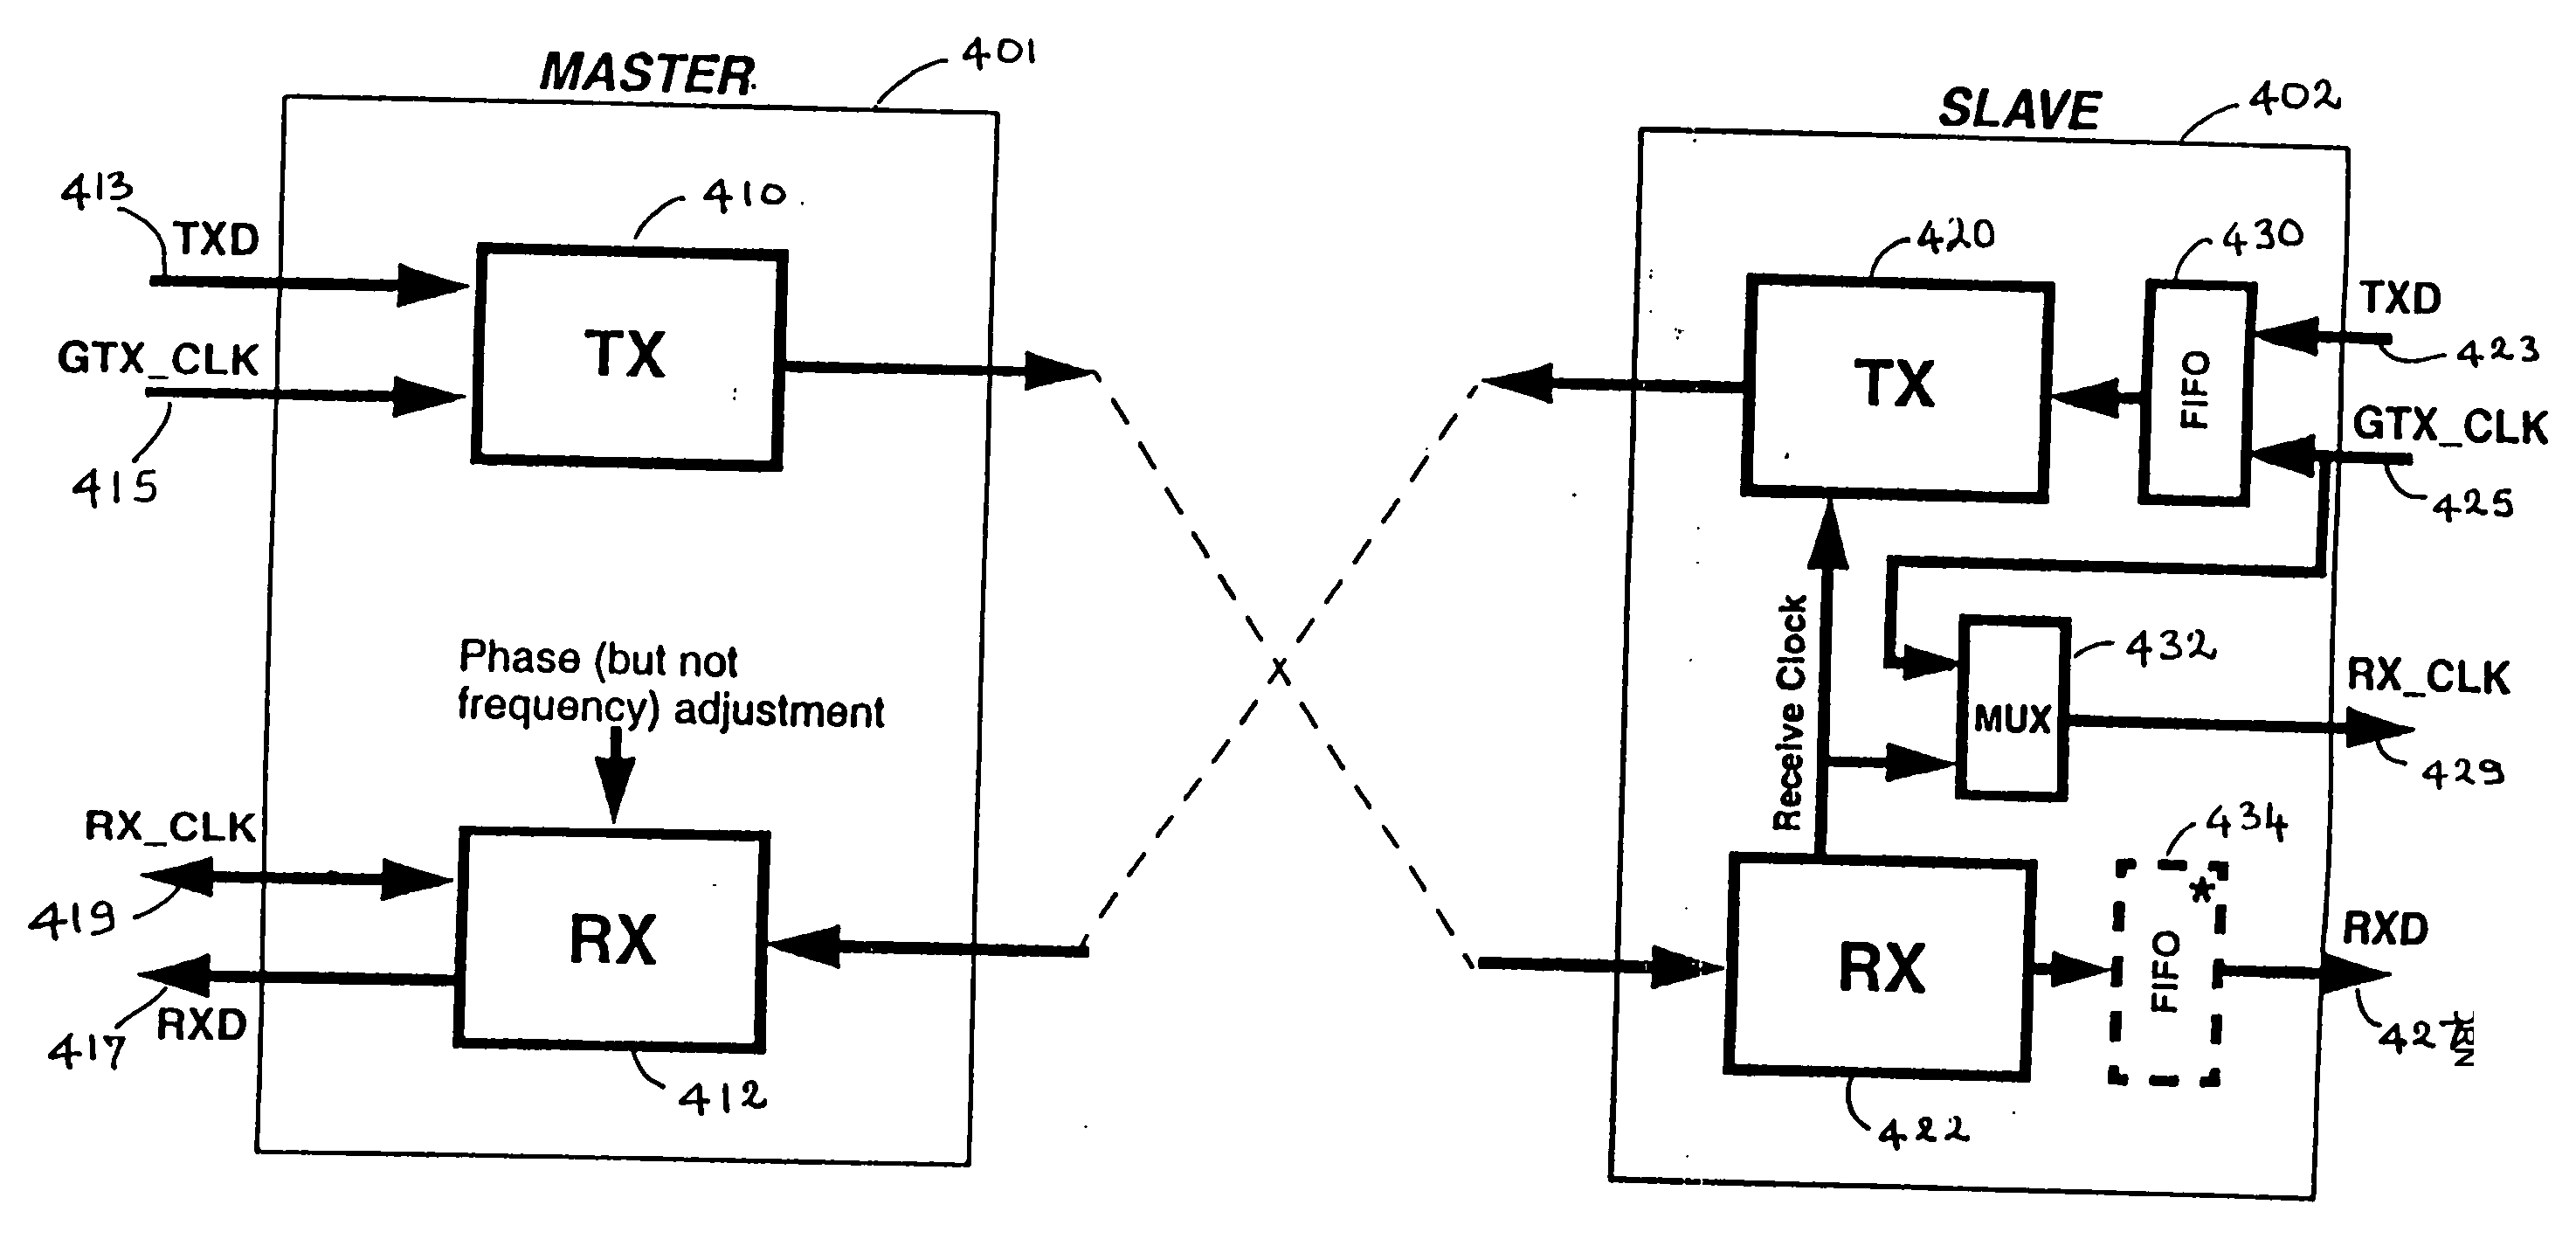 PHY control module for a multi-pair gigabit transceiver